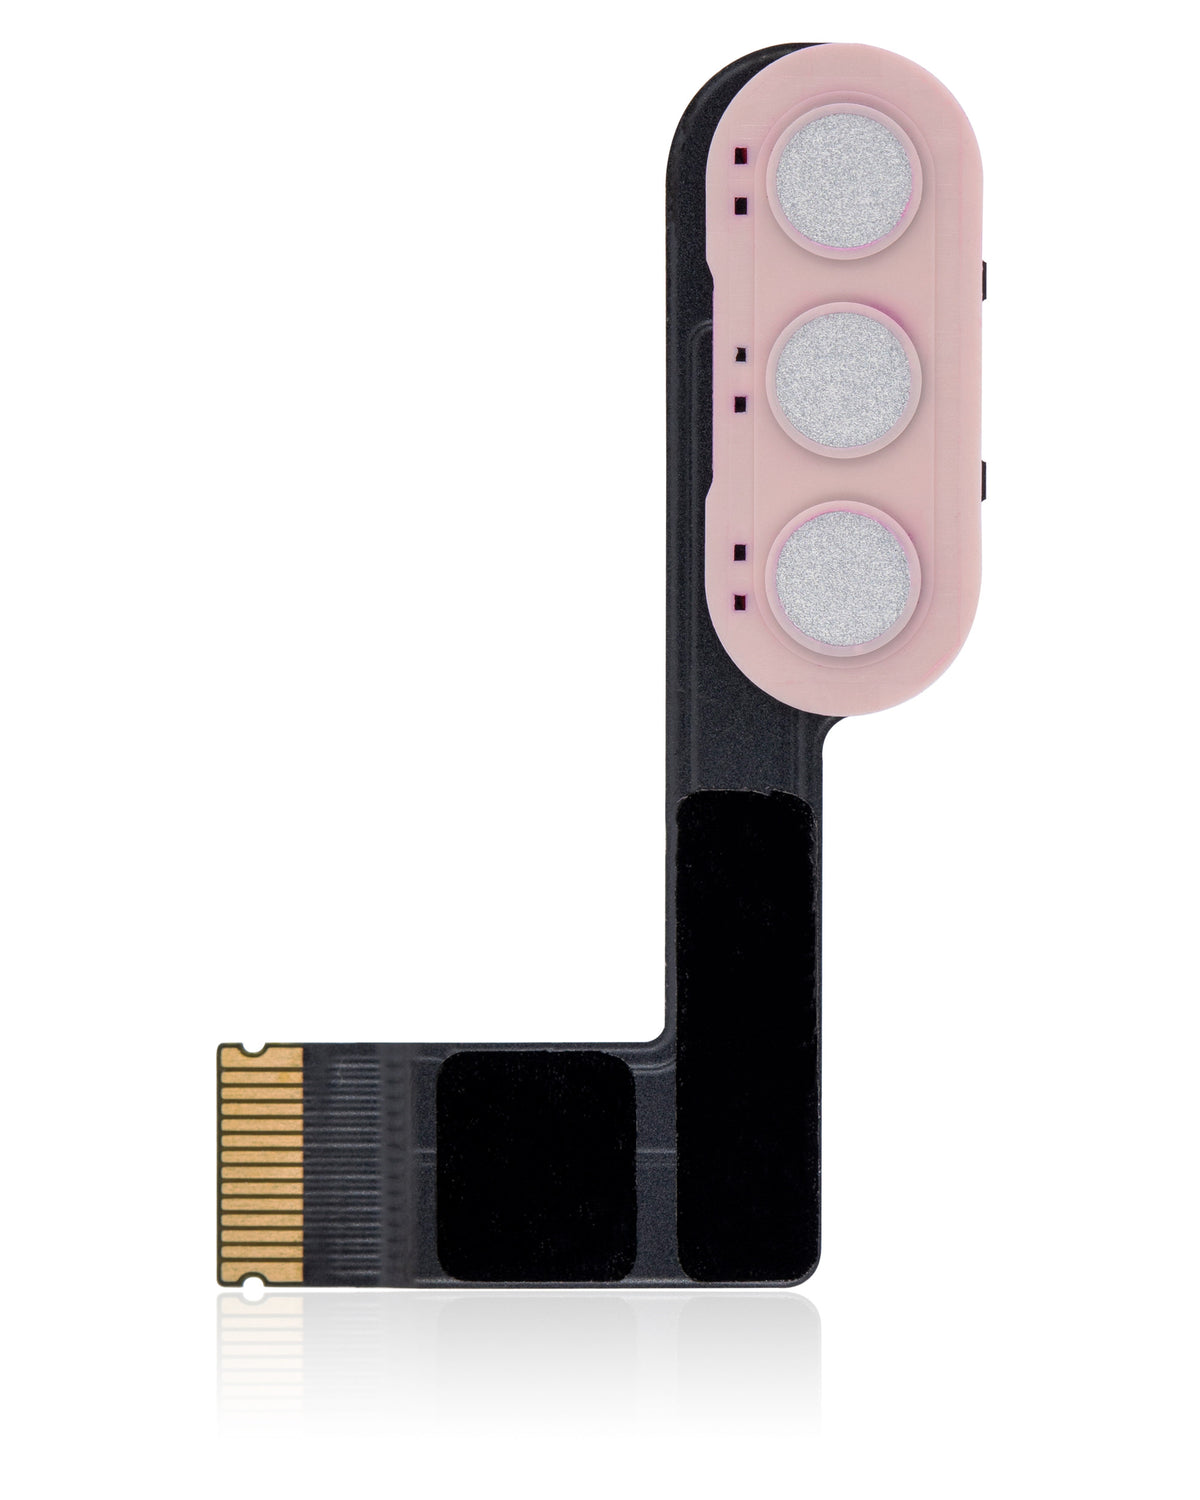 KEYBOARD FLEX CABLE COMPATIBLE FOR IPAD AIR 4 - ROSE GOLD